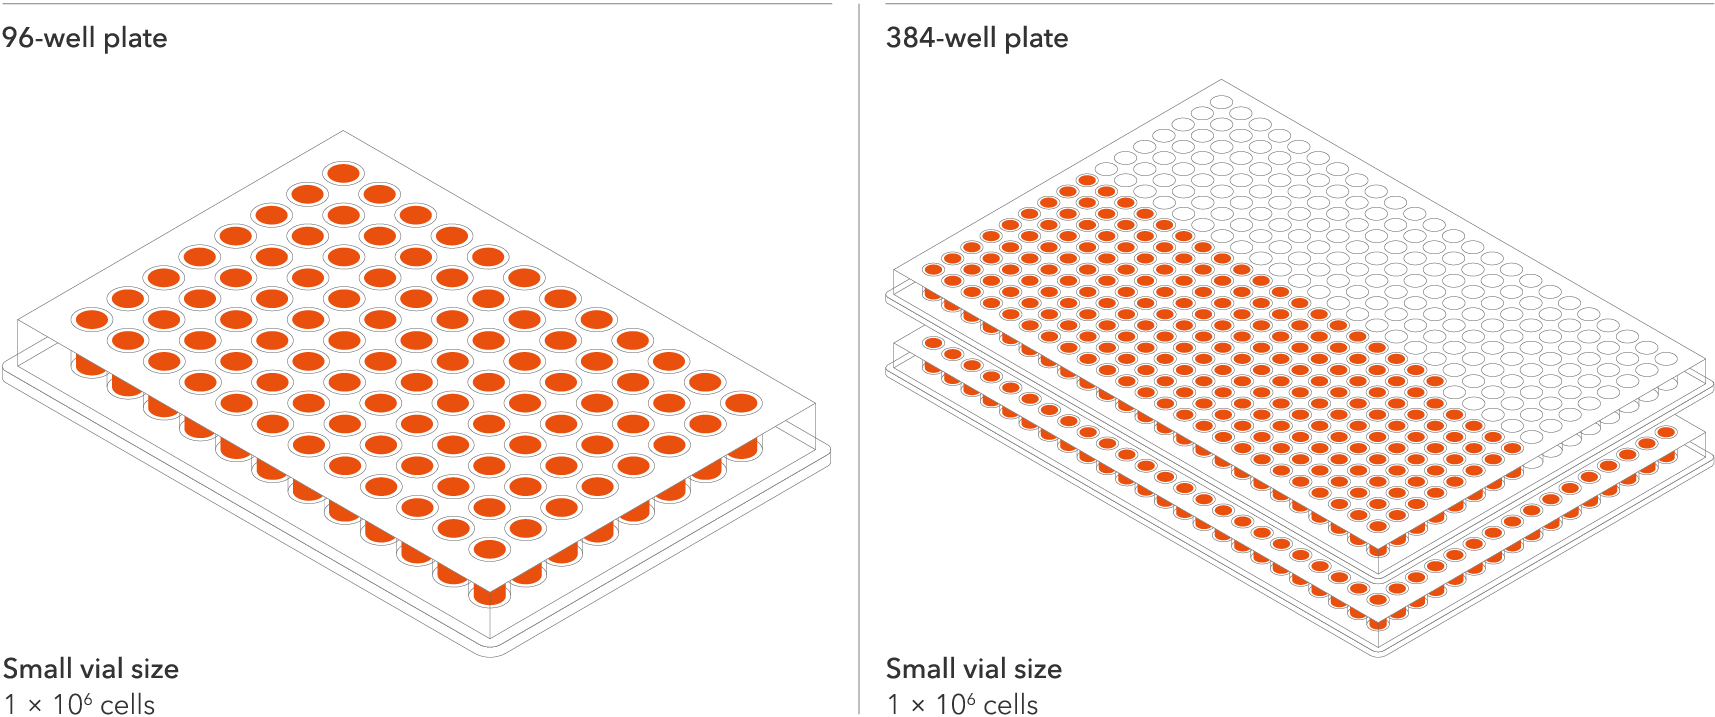 One small vial seeds 1 x 96-well plate or 1.5 x 384-well plates.